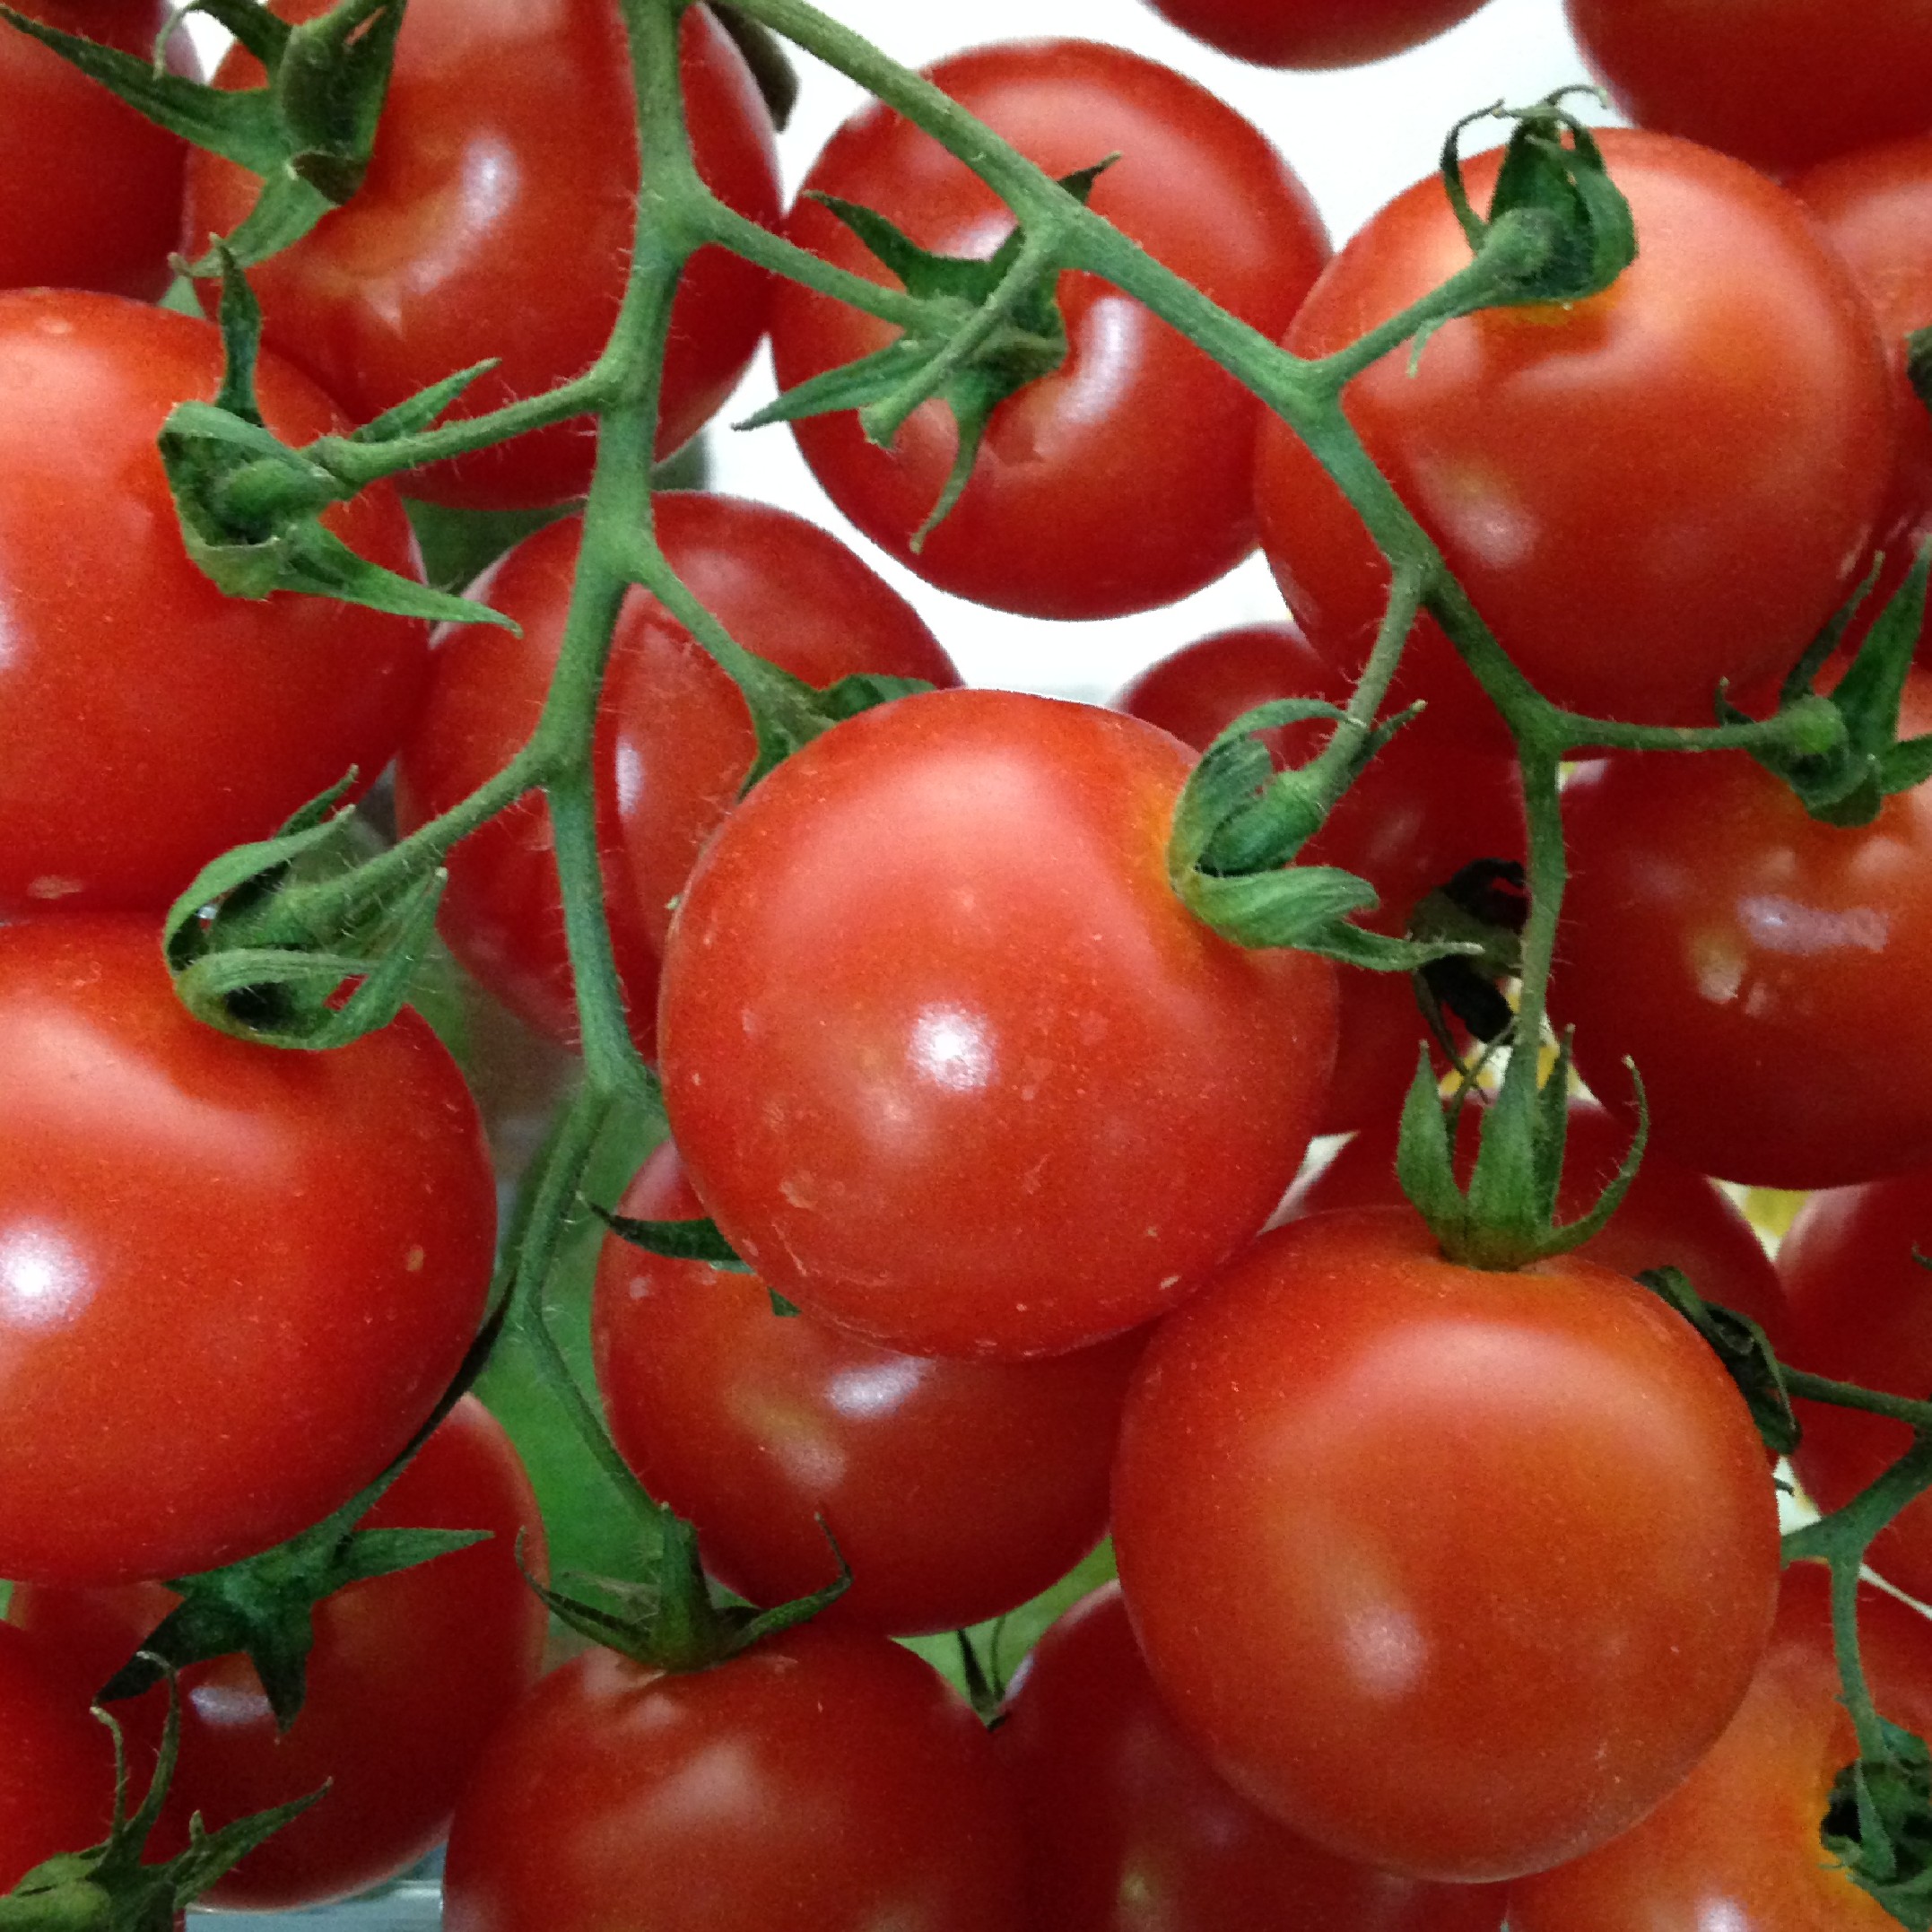 Spanish tomato growers have stressed the importance of separate minimum entry prices for round and cherry tomatoes entering the EU market.